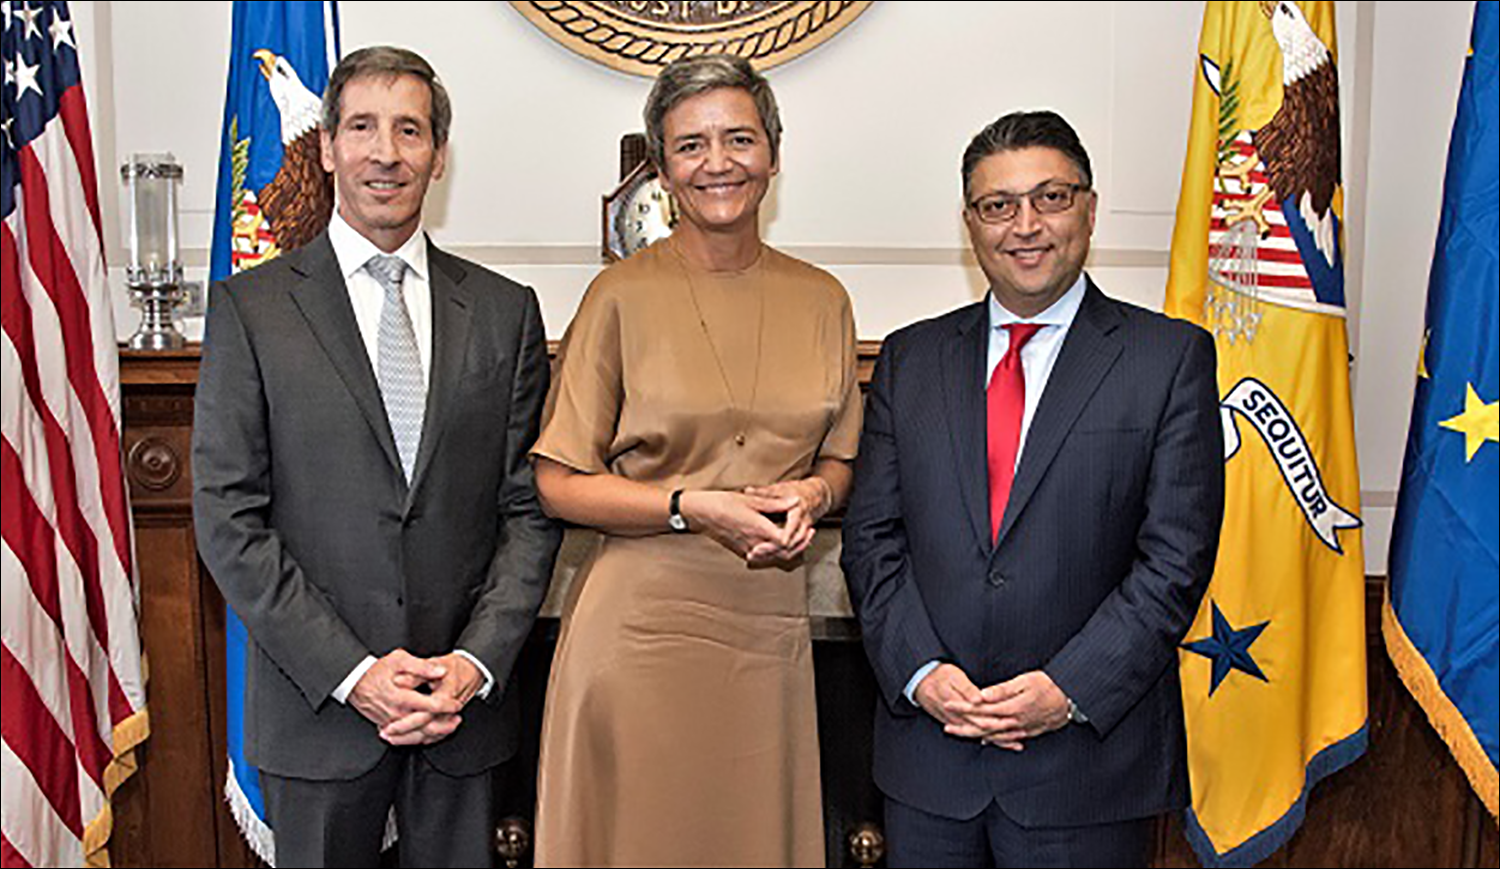 L-R: FTC Chairman Joseph Simons, EU Competition Commissioner Margrethe Vestager, and Assistant Attorney General Makan Delrahim